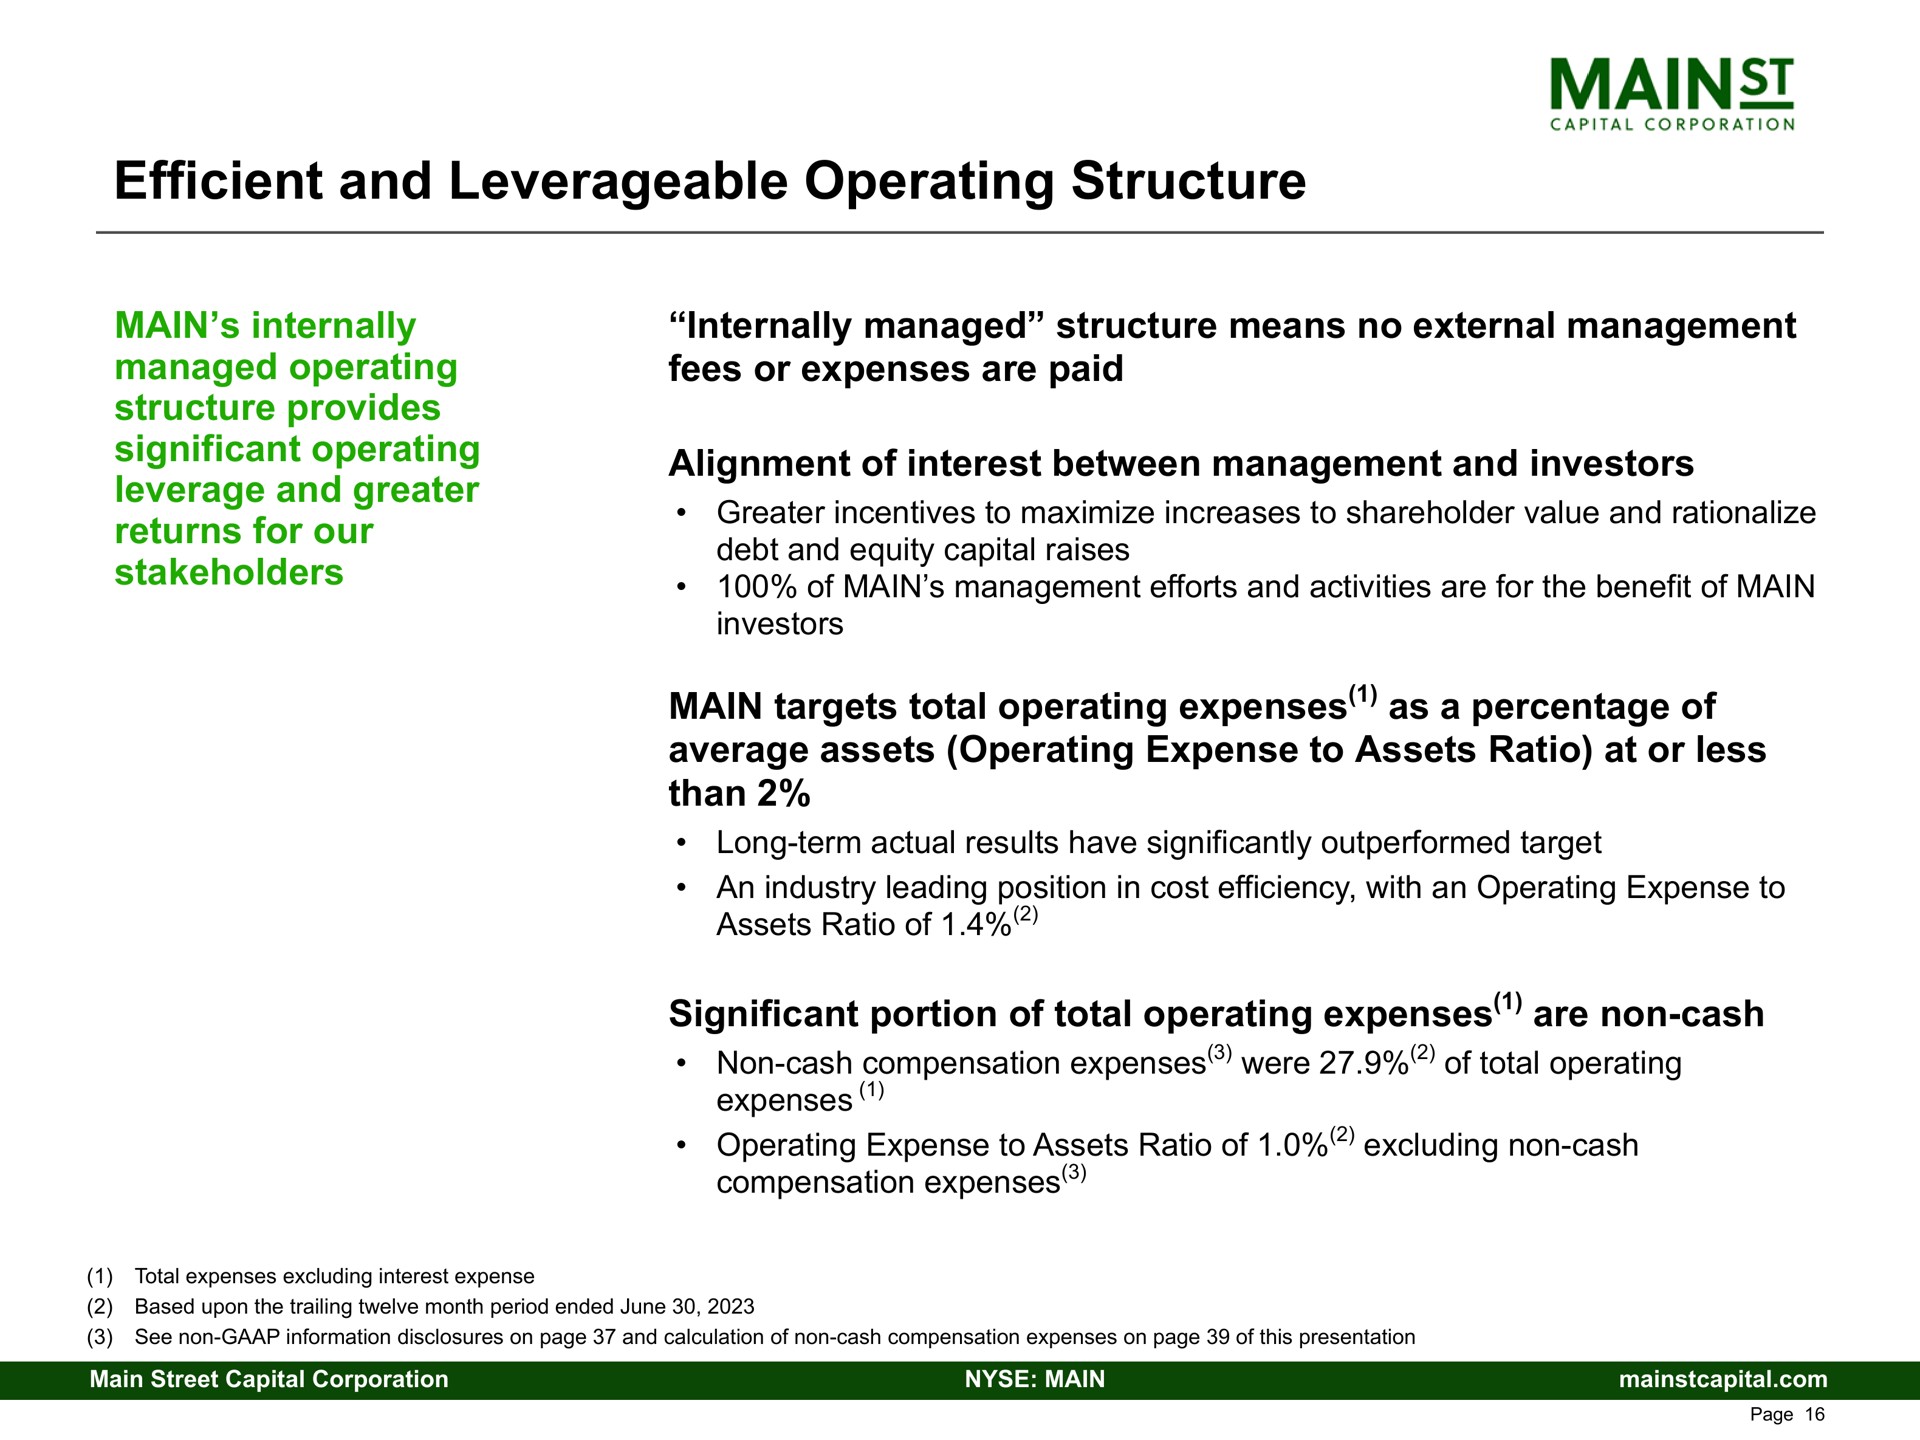 efficient and operating structure main internally managed operating structure provides significant operating leverage and greater returns for our stakeholders internally managed structure means no external management fees or expenses are paid alignment of interest between management and investors main targets total operating expenses as a percentage of average assets operating expense to assets ratio at or less than significant portion of total operating expenses are non cash | Main Street Capital